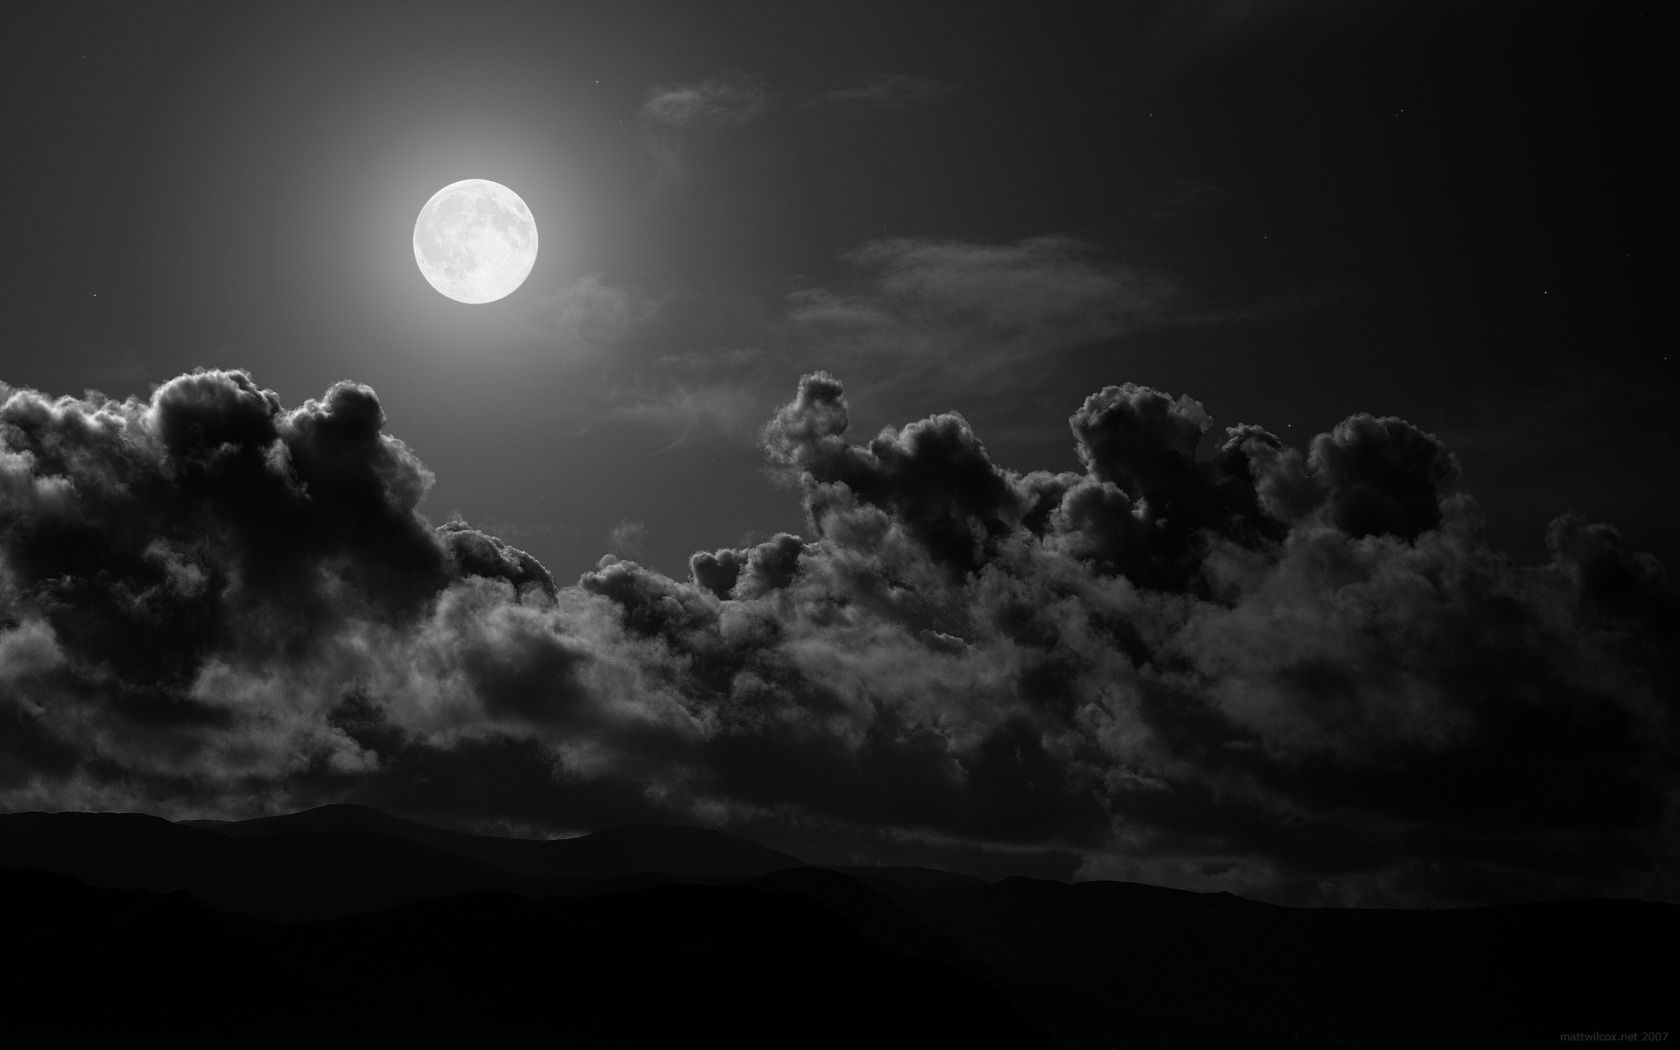 Moonlight night wallpapers and images - wallpapers, pictures, photos